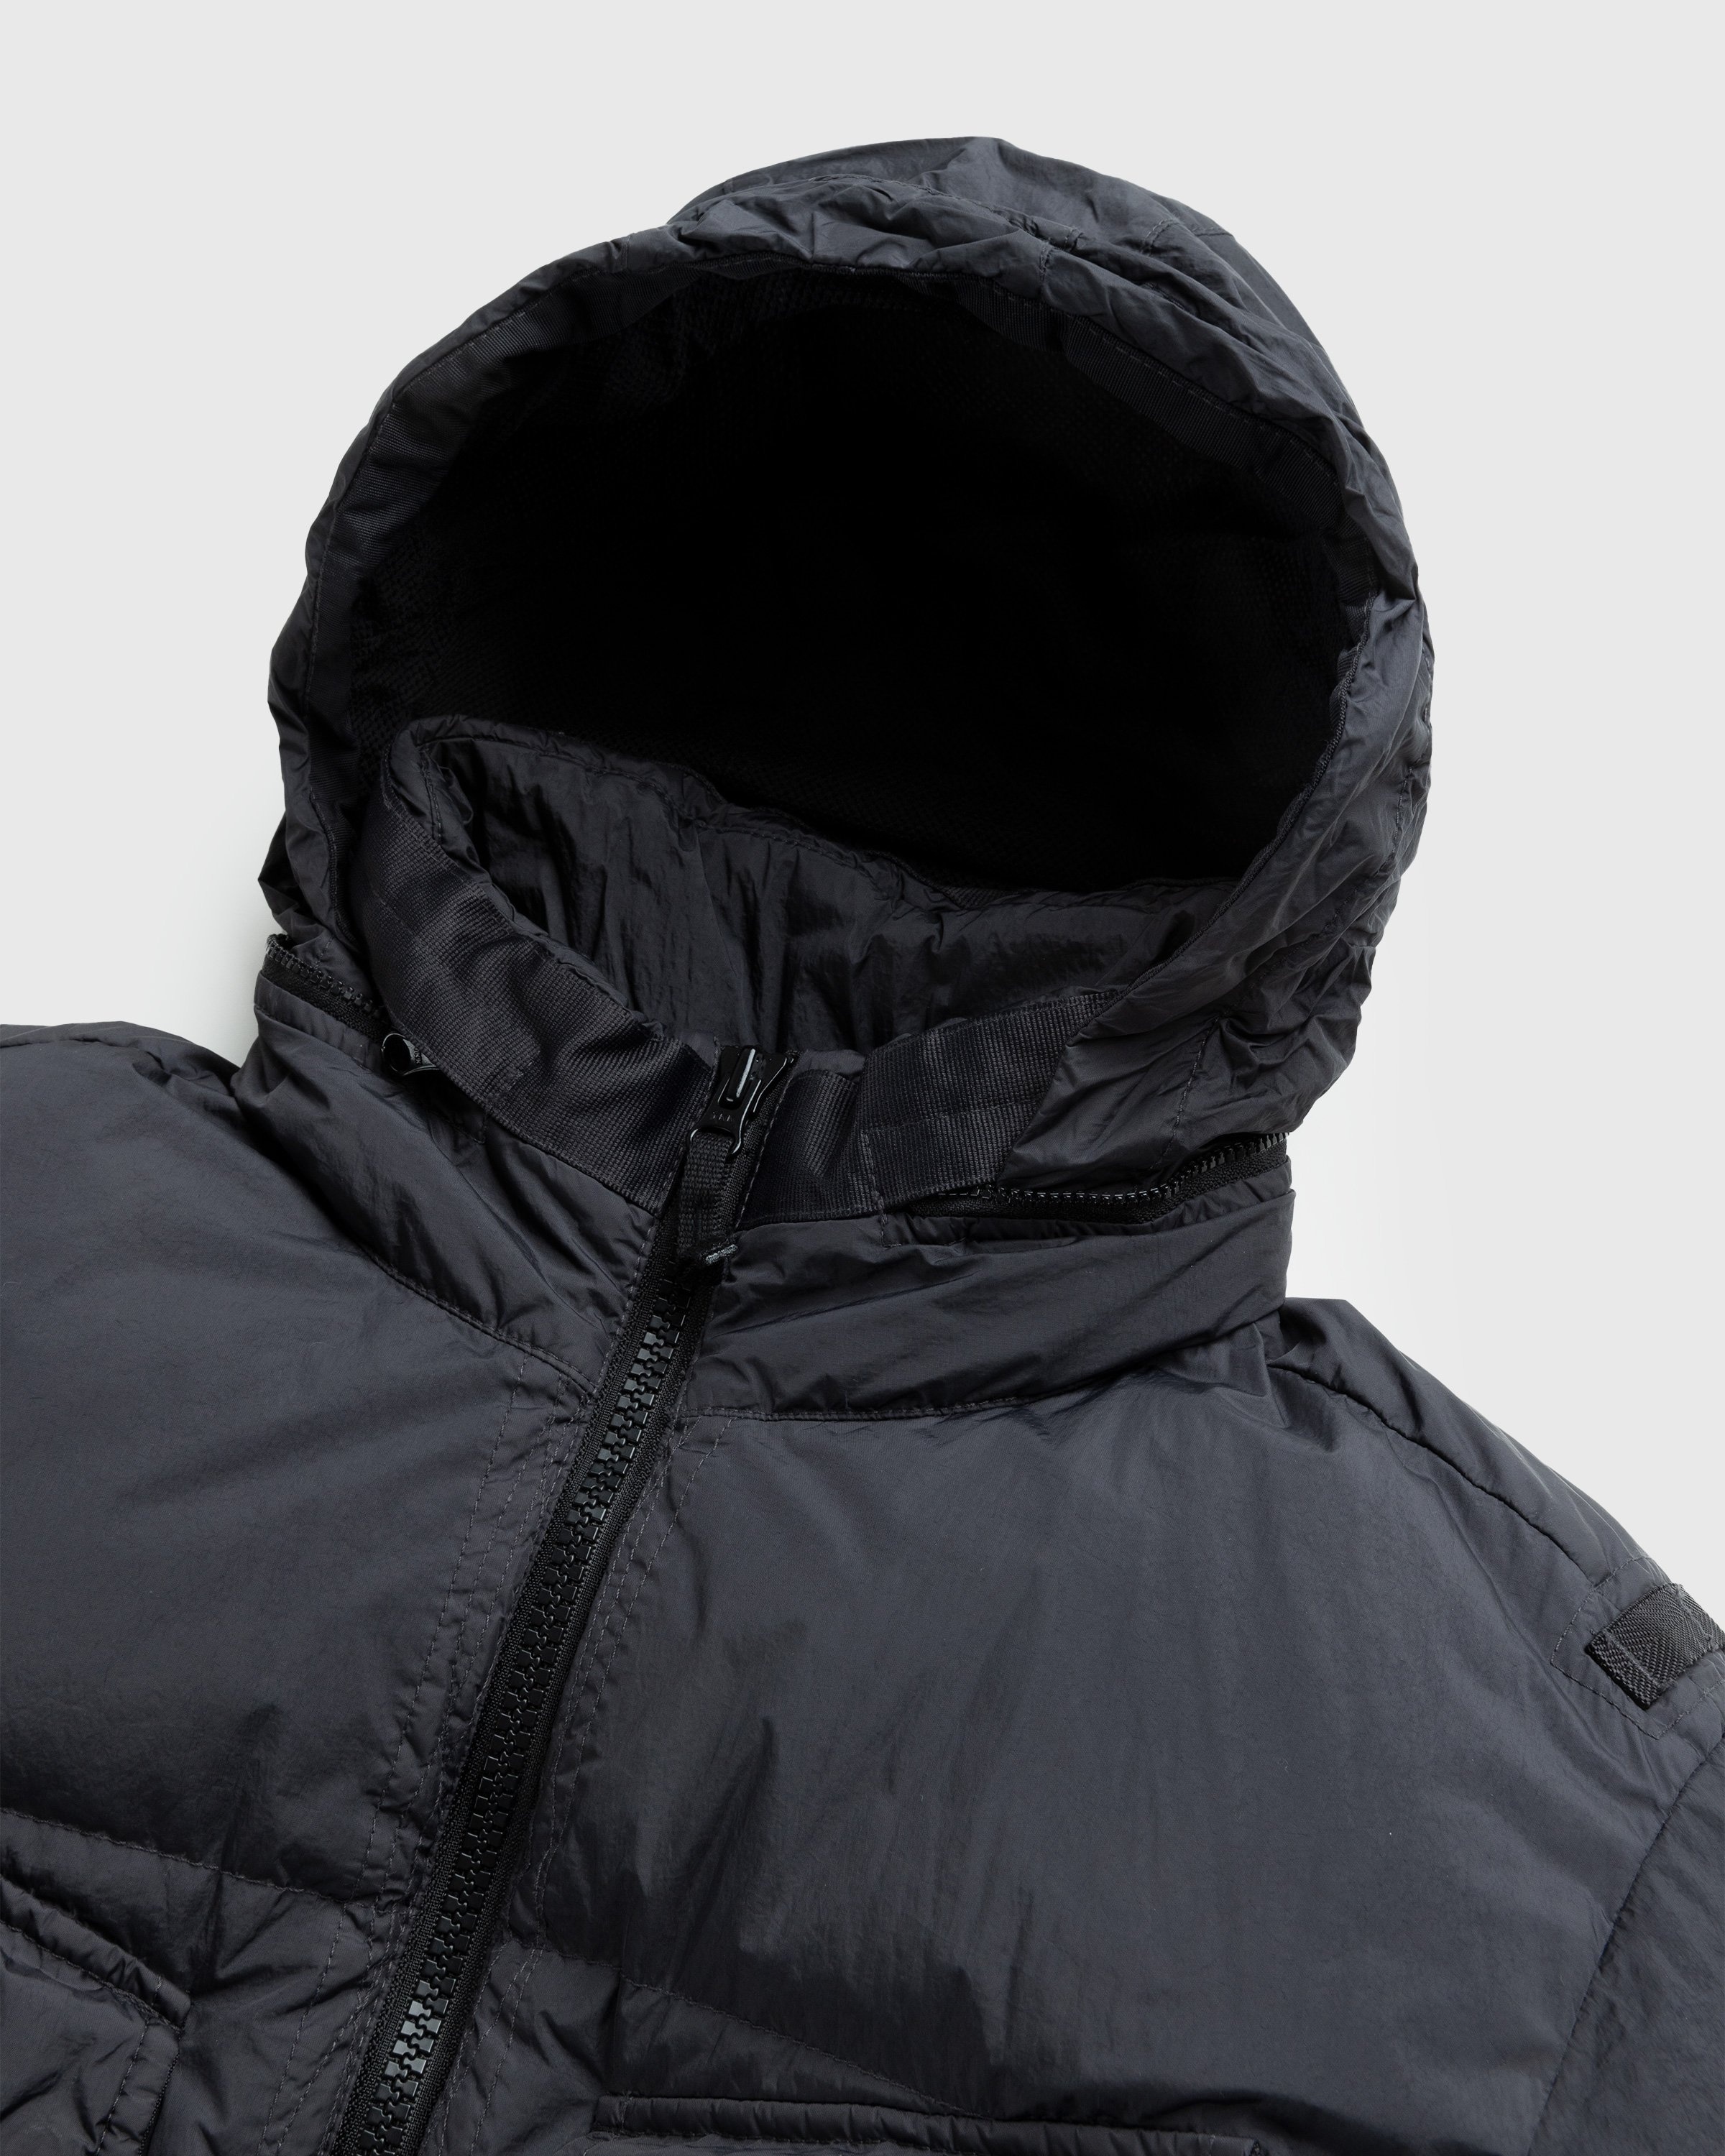 Stone Island – Garment-Dyed Crinkle Down Jacket Charcoal - Outerwear - Grey - Image 3